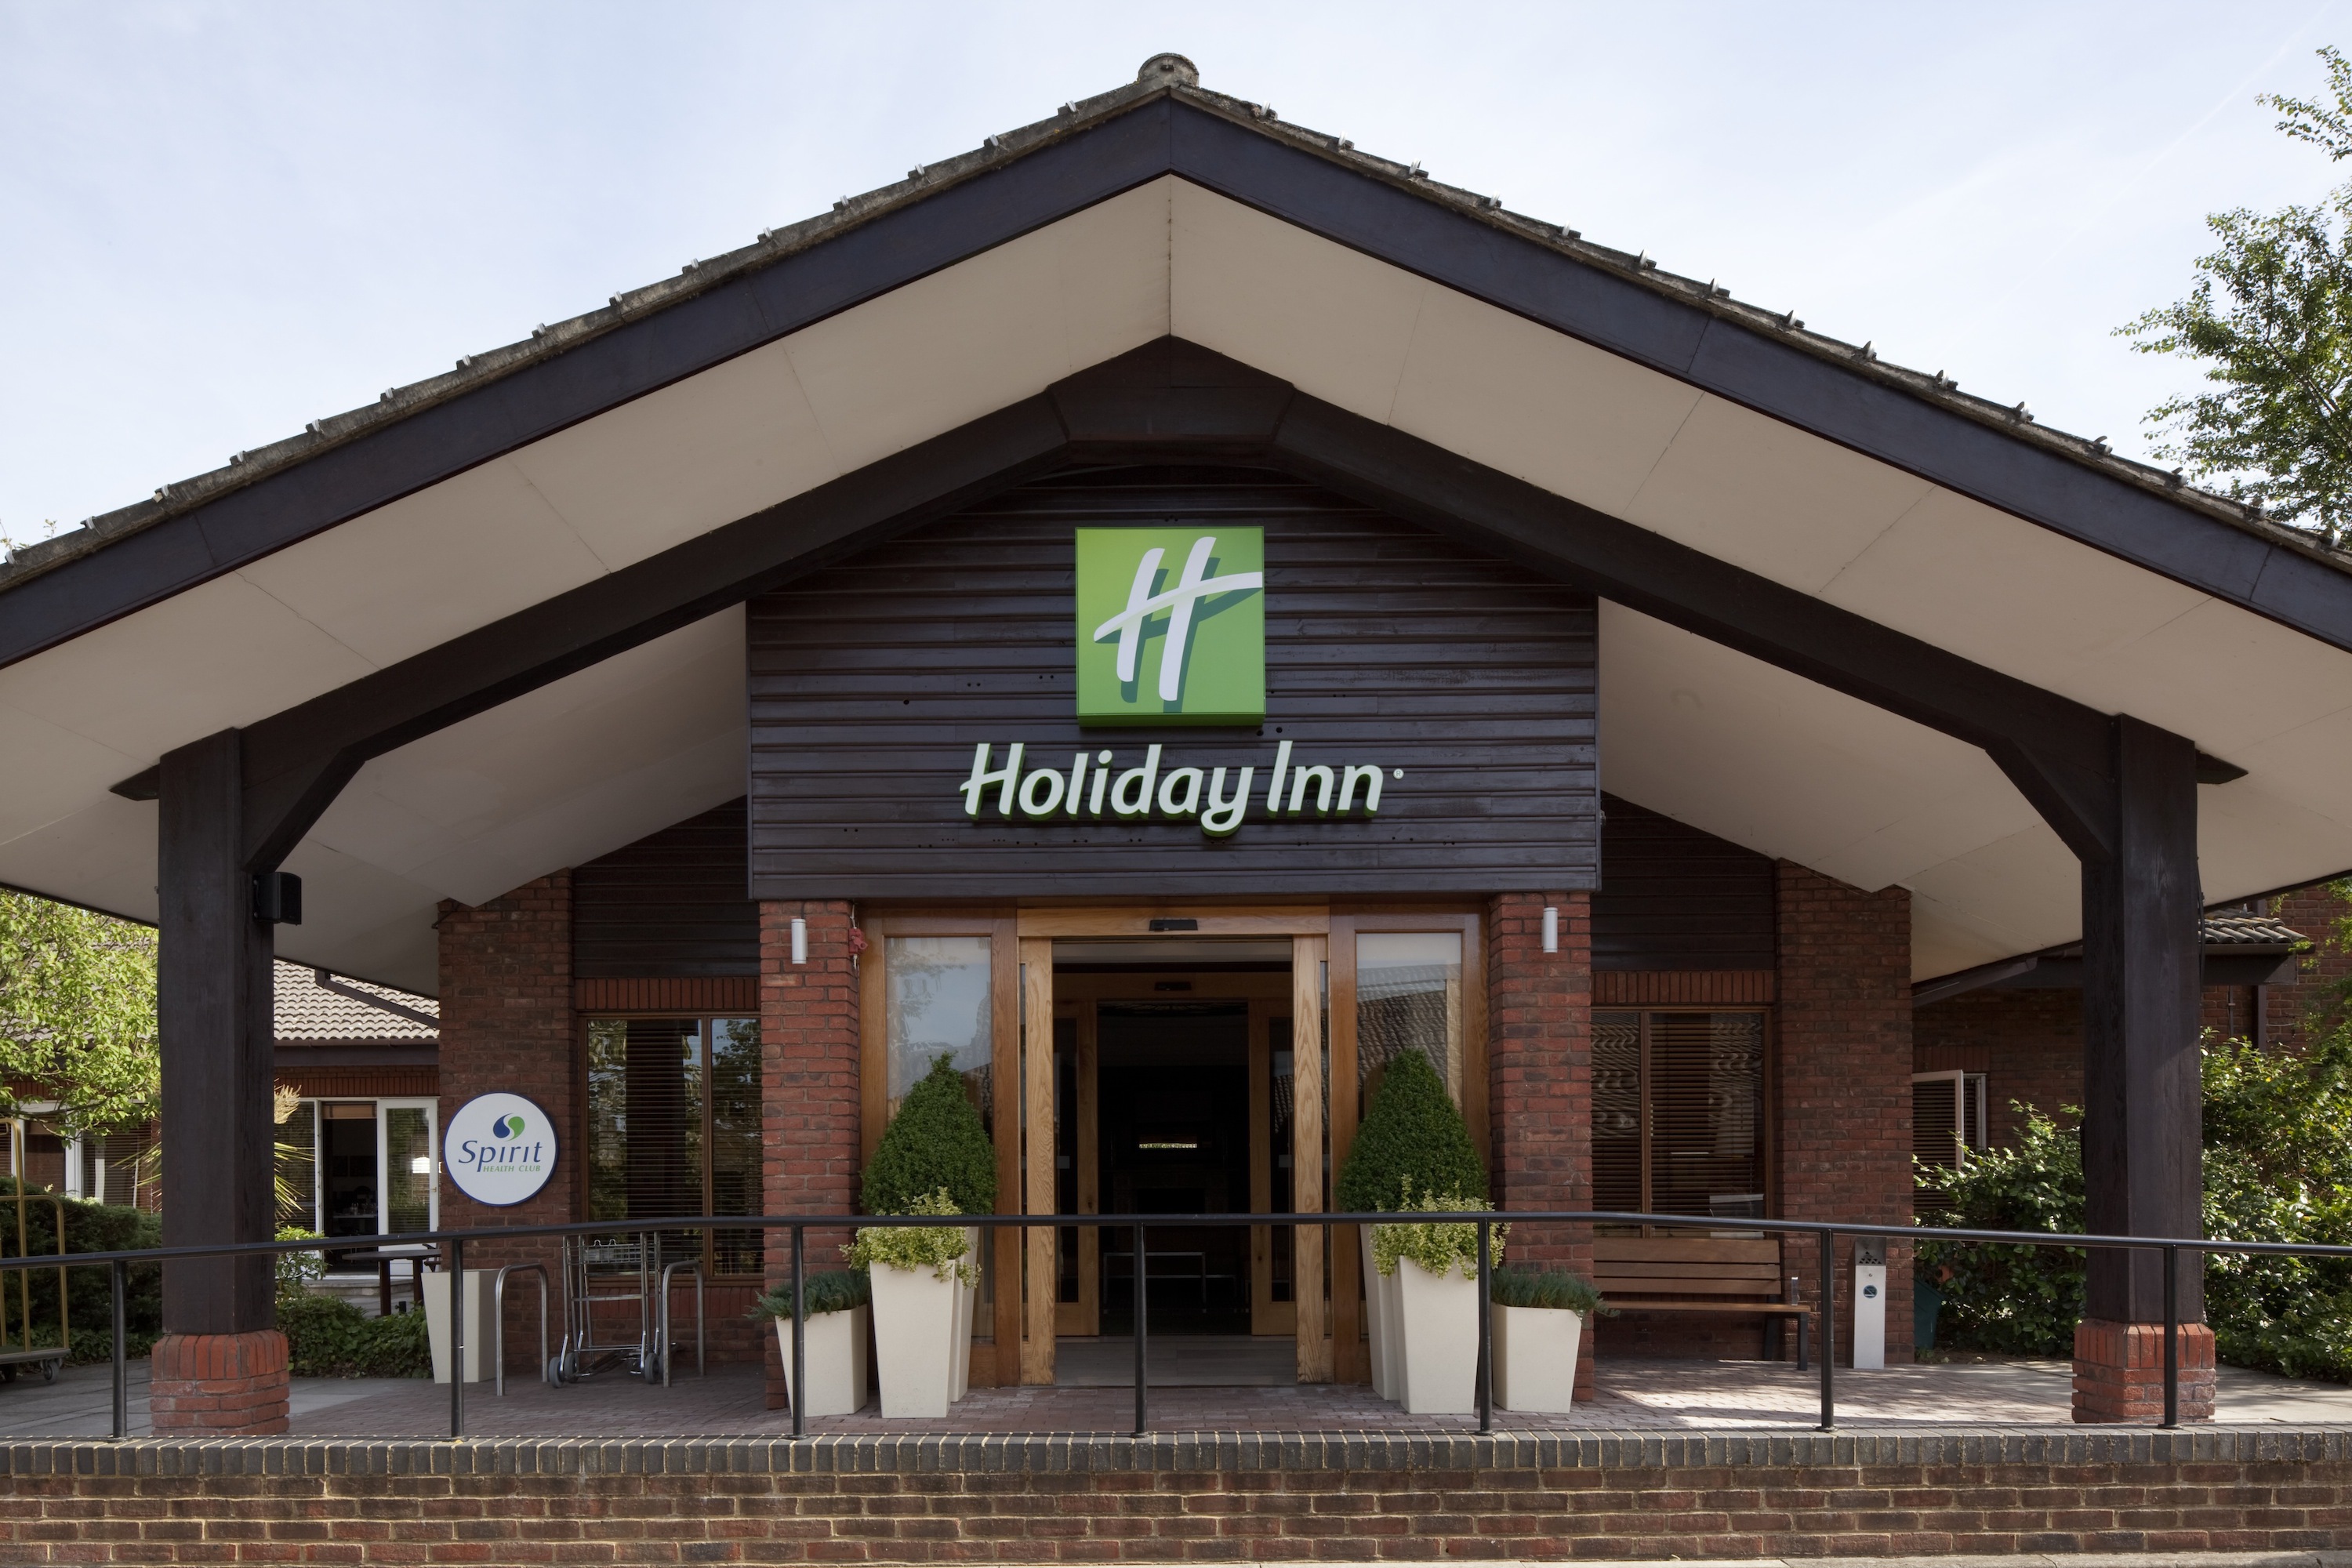 Photo of Holiday Inn Guildford, Guildford, United Kingdom